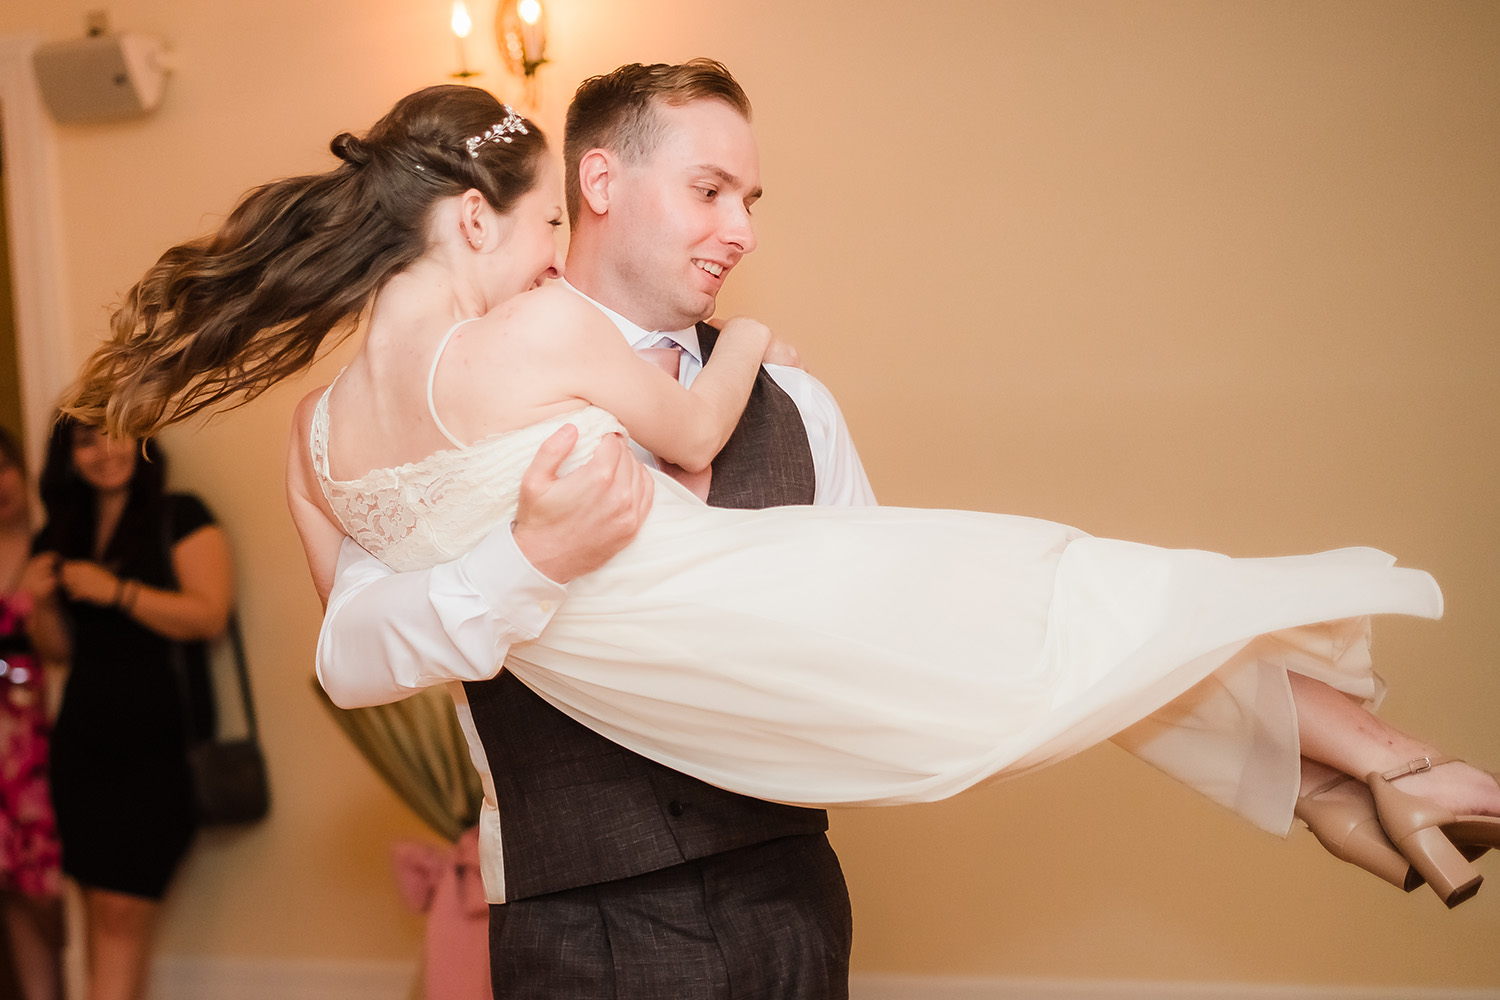 Bride and groom First Dance at Wilder Mansion in Elmhurst, IL